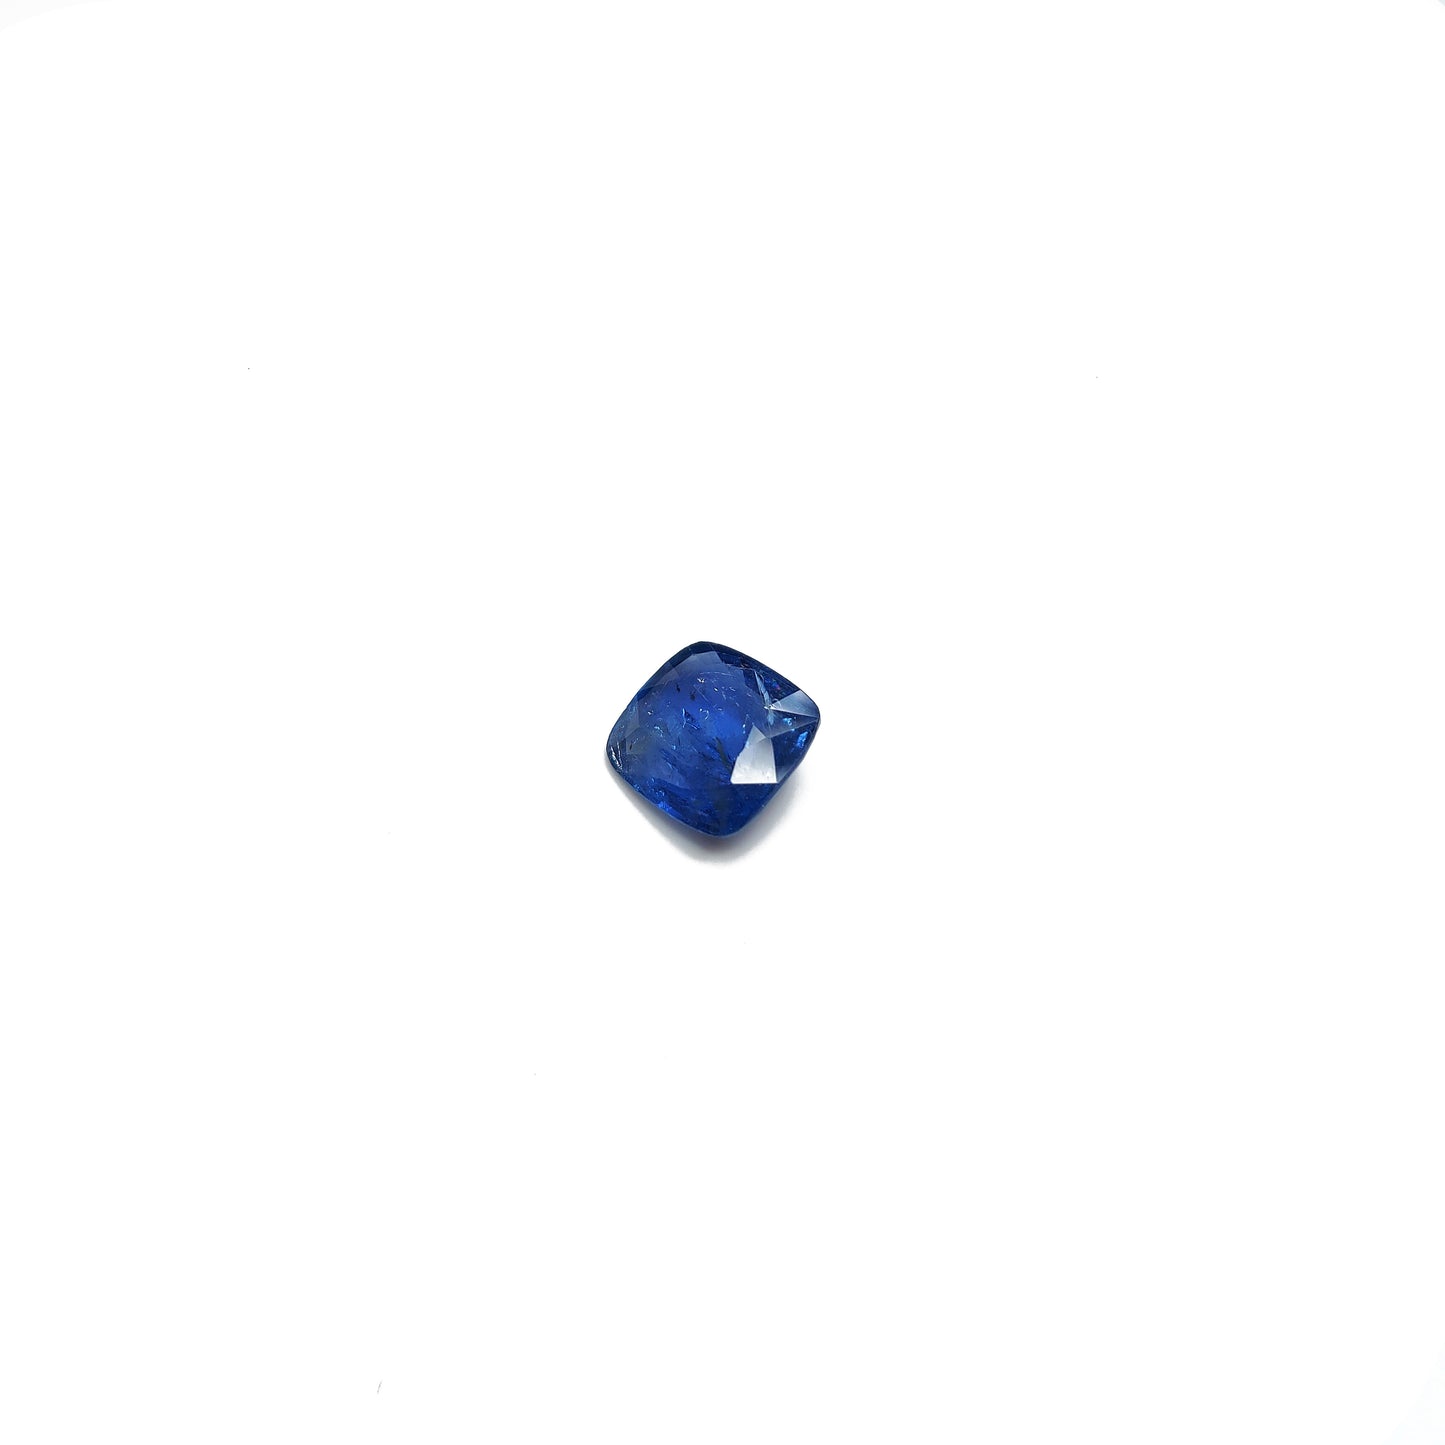 100% Natural Unheated Blue Sapphire | 6.30cts